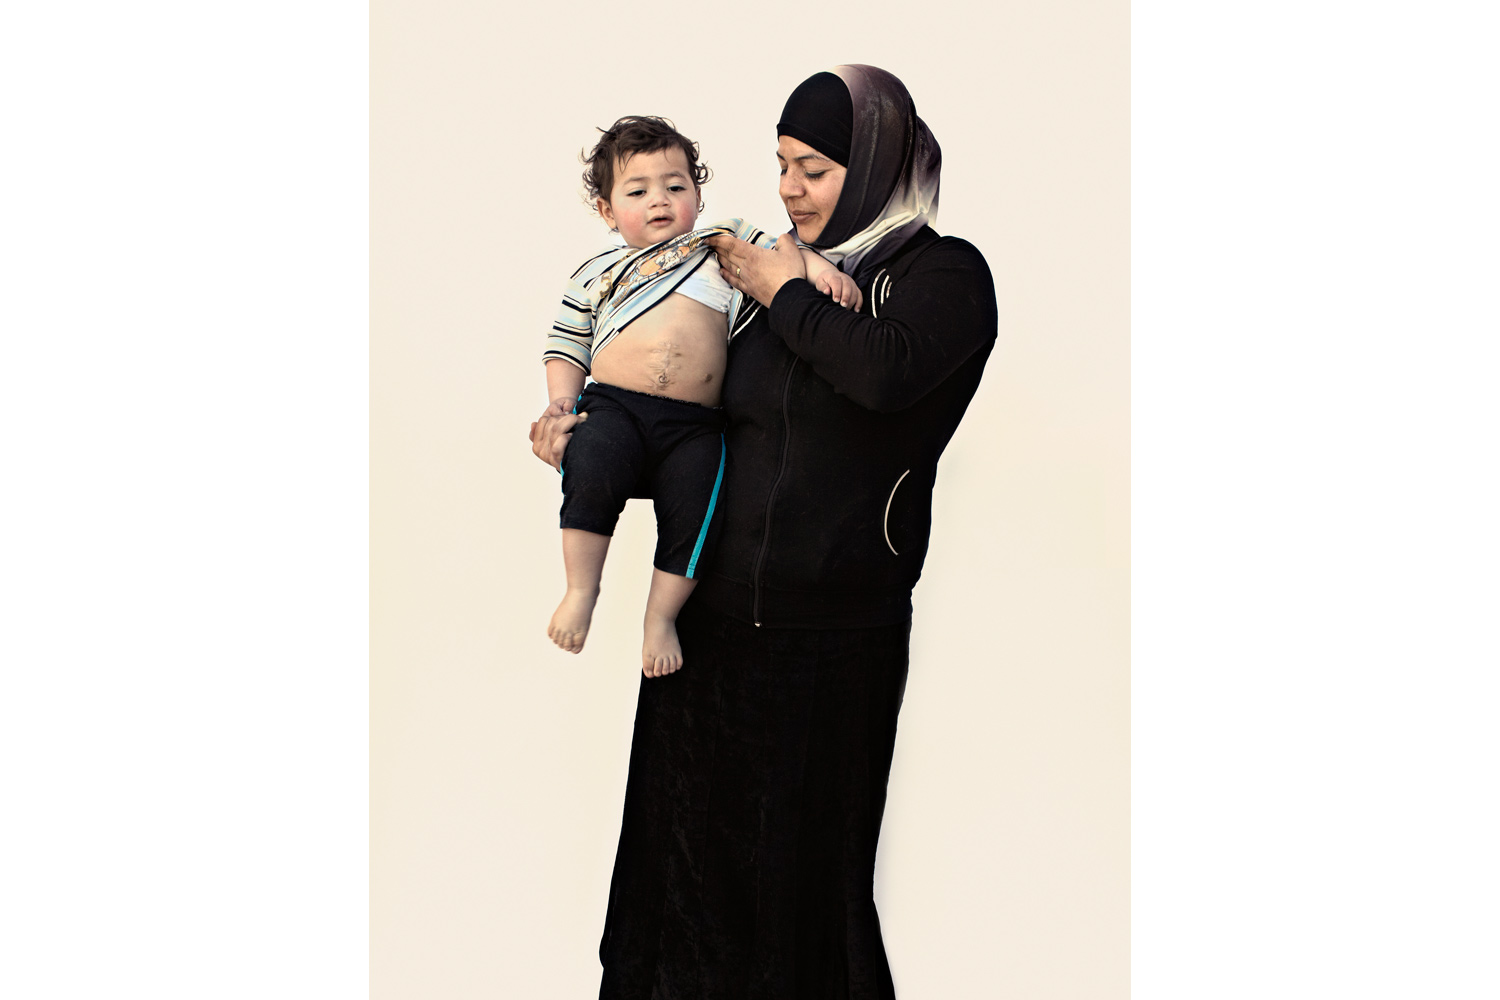 Fadia al-Abdo, 27, with her year-old son Mohammad Dali“My son had a hernia and needed to be operated on [in Syria]. I left him for just a minute, and that’s when the soldiers came into the hospital. By the time I got back to my son’s room, his insides were outside his body. He has had four operations so far. They say a small bullet or shrapnel hit him, cut him open. I have spent a year
                              like this, watching him suffer. God damn Bashar.”